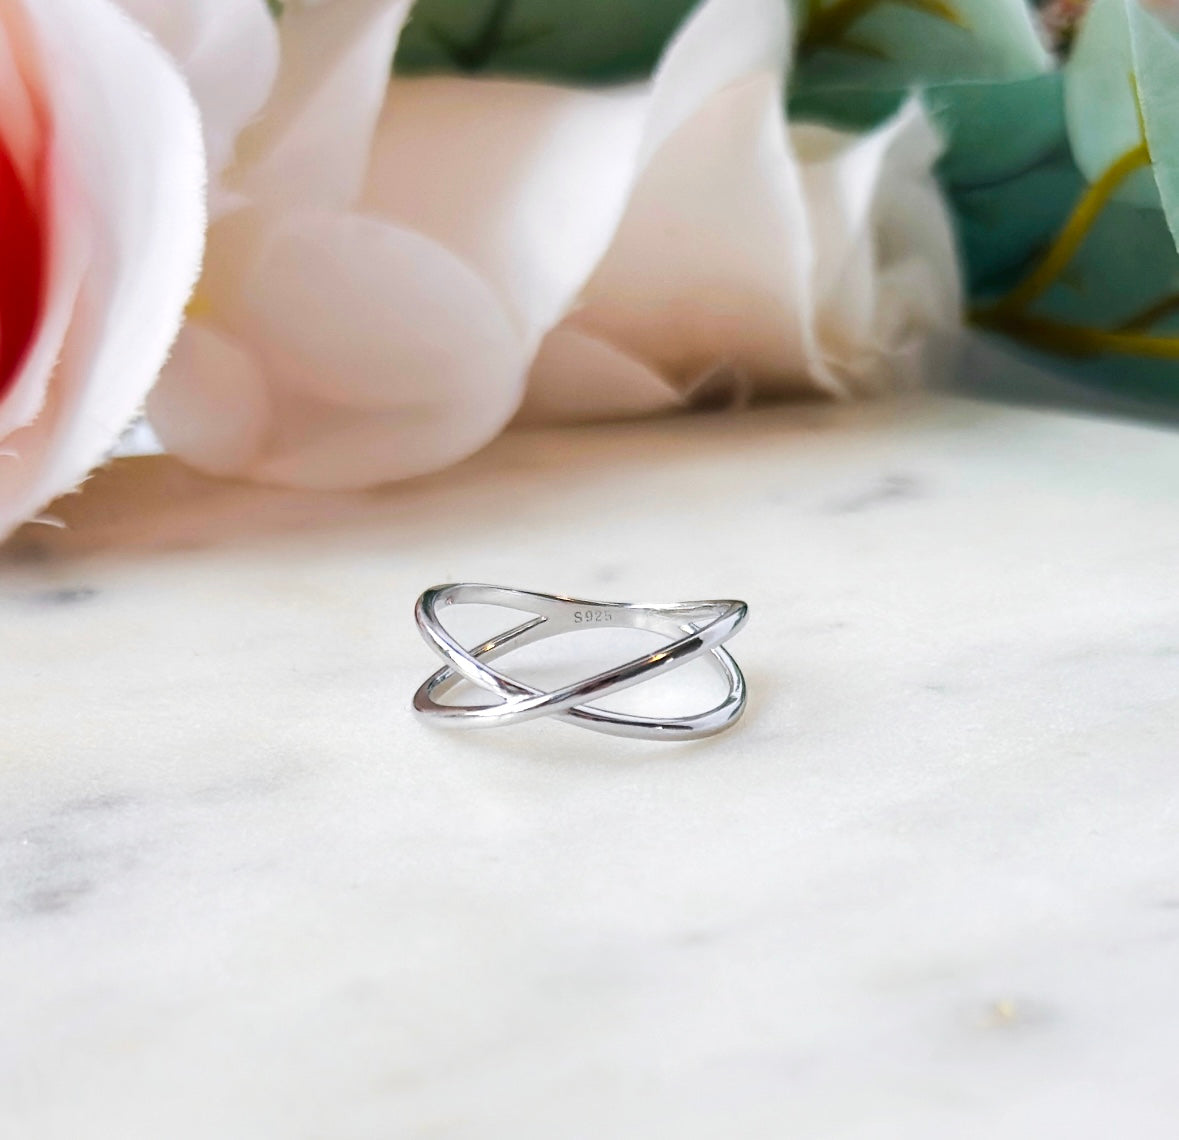 criss cross sterling silver ring canada